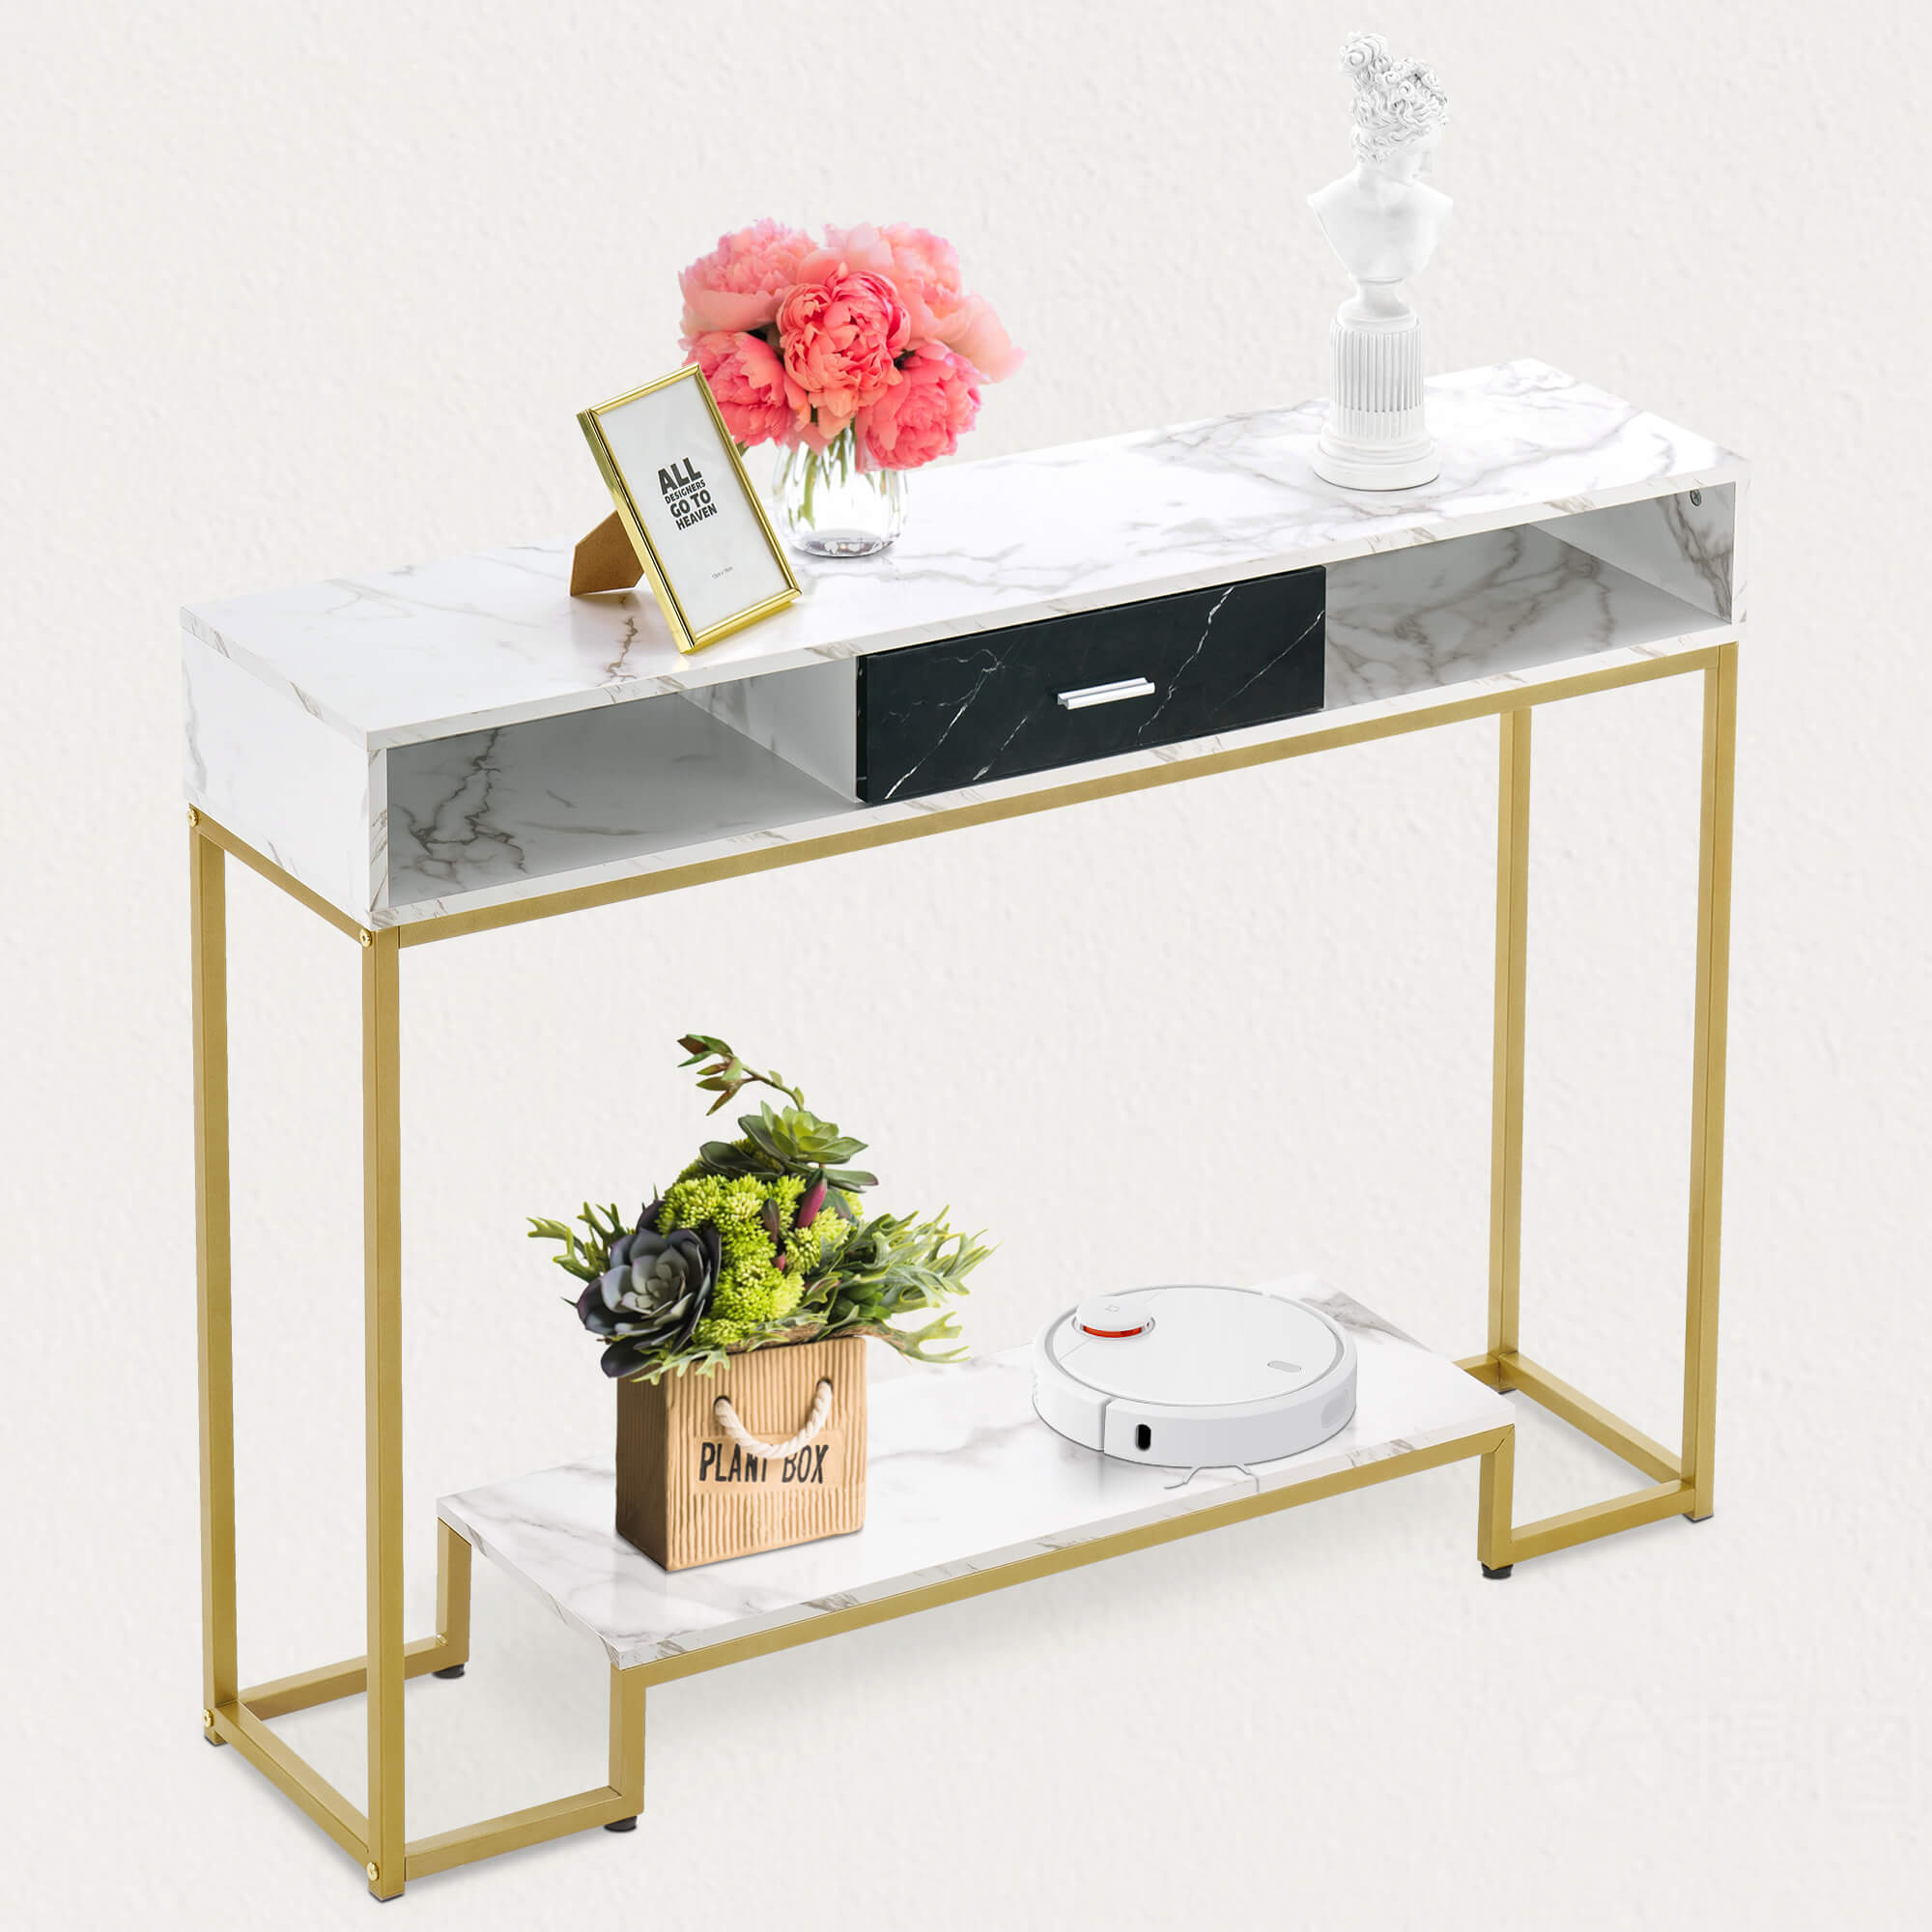 ivinta Console Table with Drawers, Gold Entryway Table with Shoe Storage, Narrow Long Sofa Tables